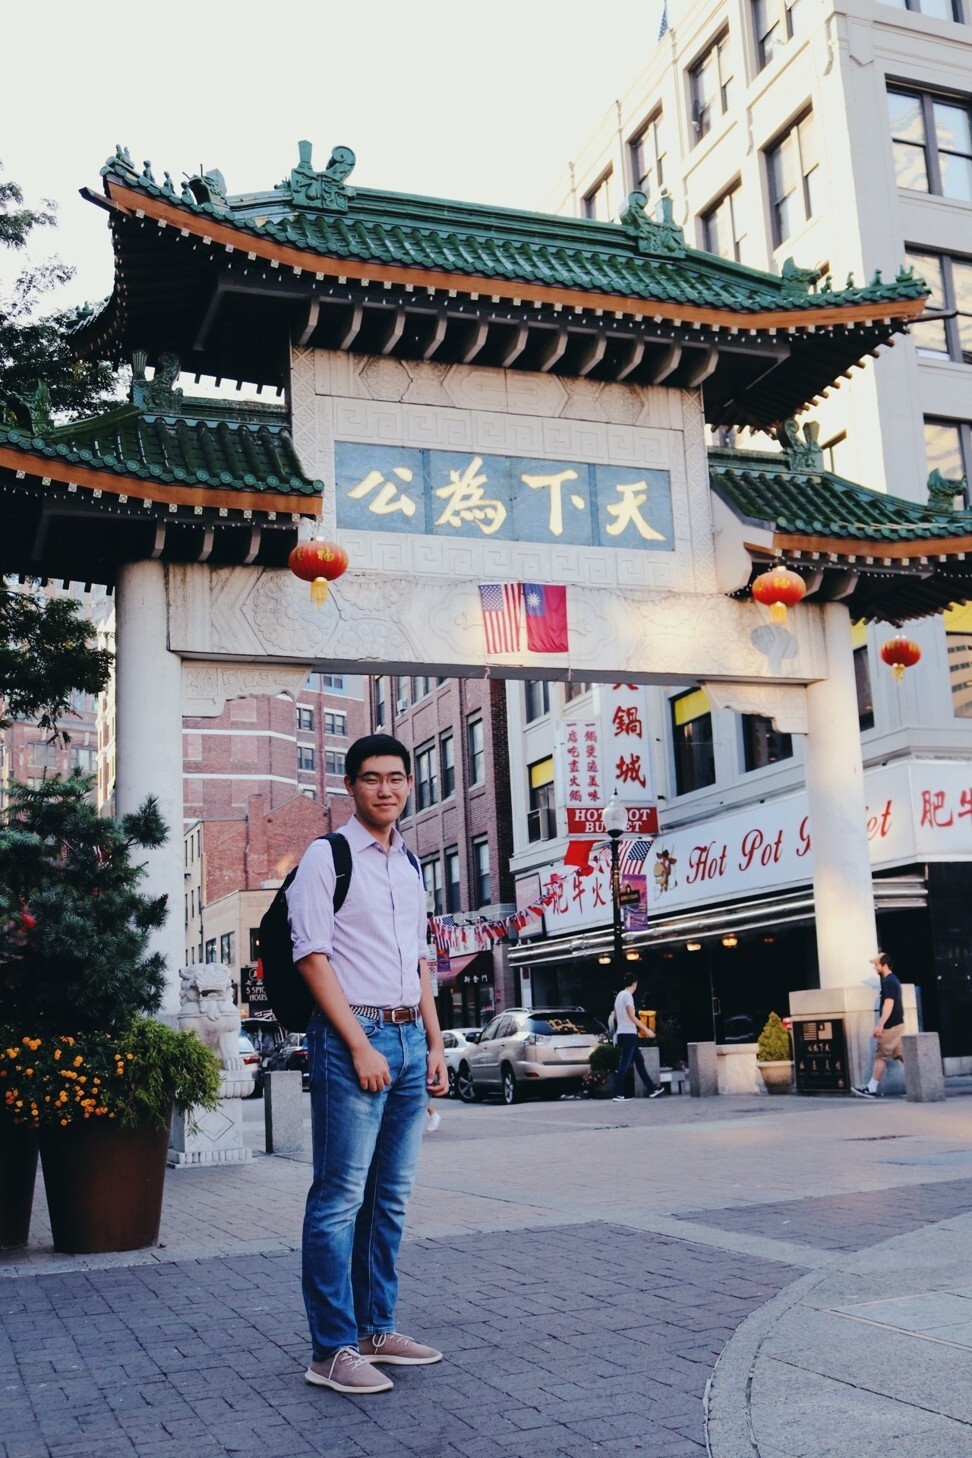 Tianyu Fang, a first-year college student at Stanford University, managed to get back to Beijing in March. Photo: Handout